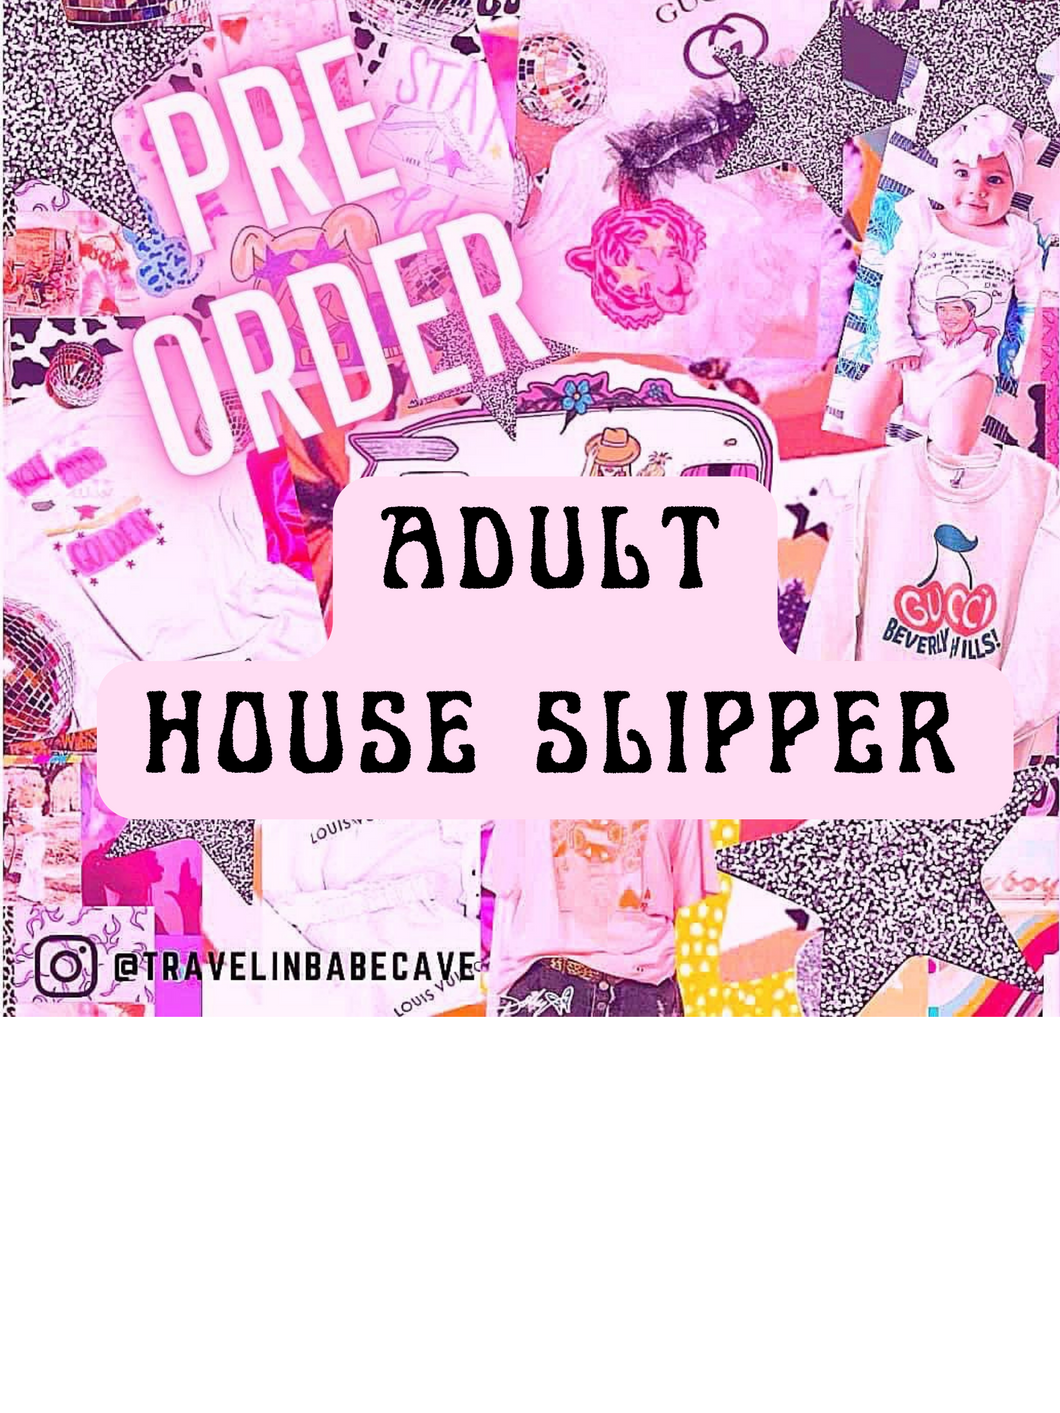 PRE ORDER House slippers